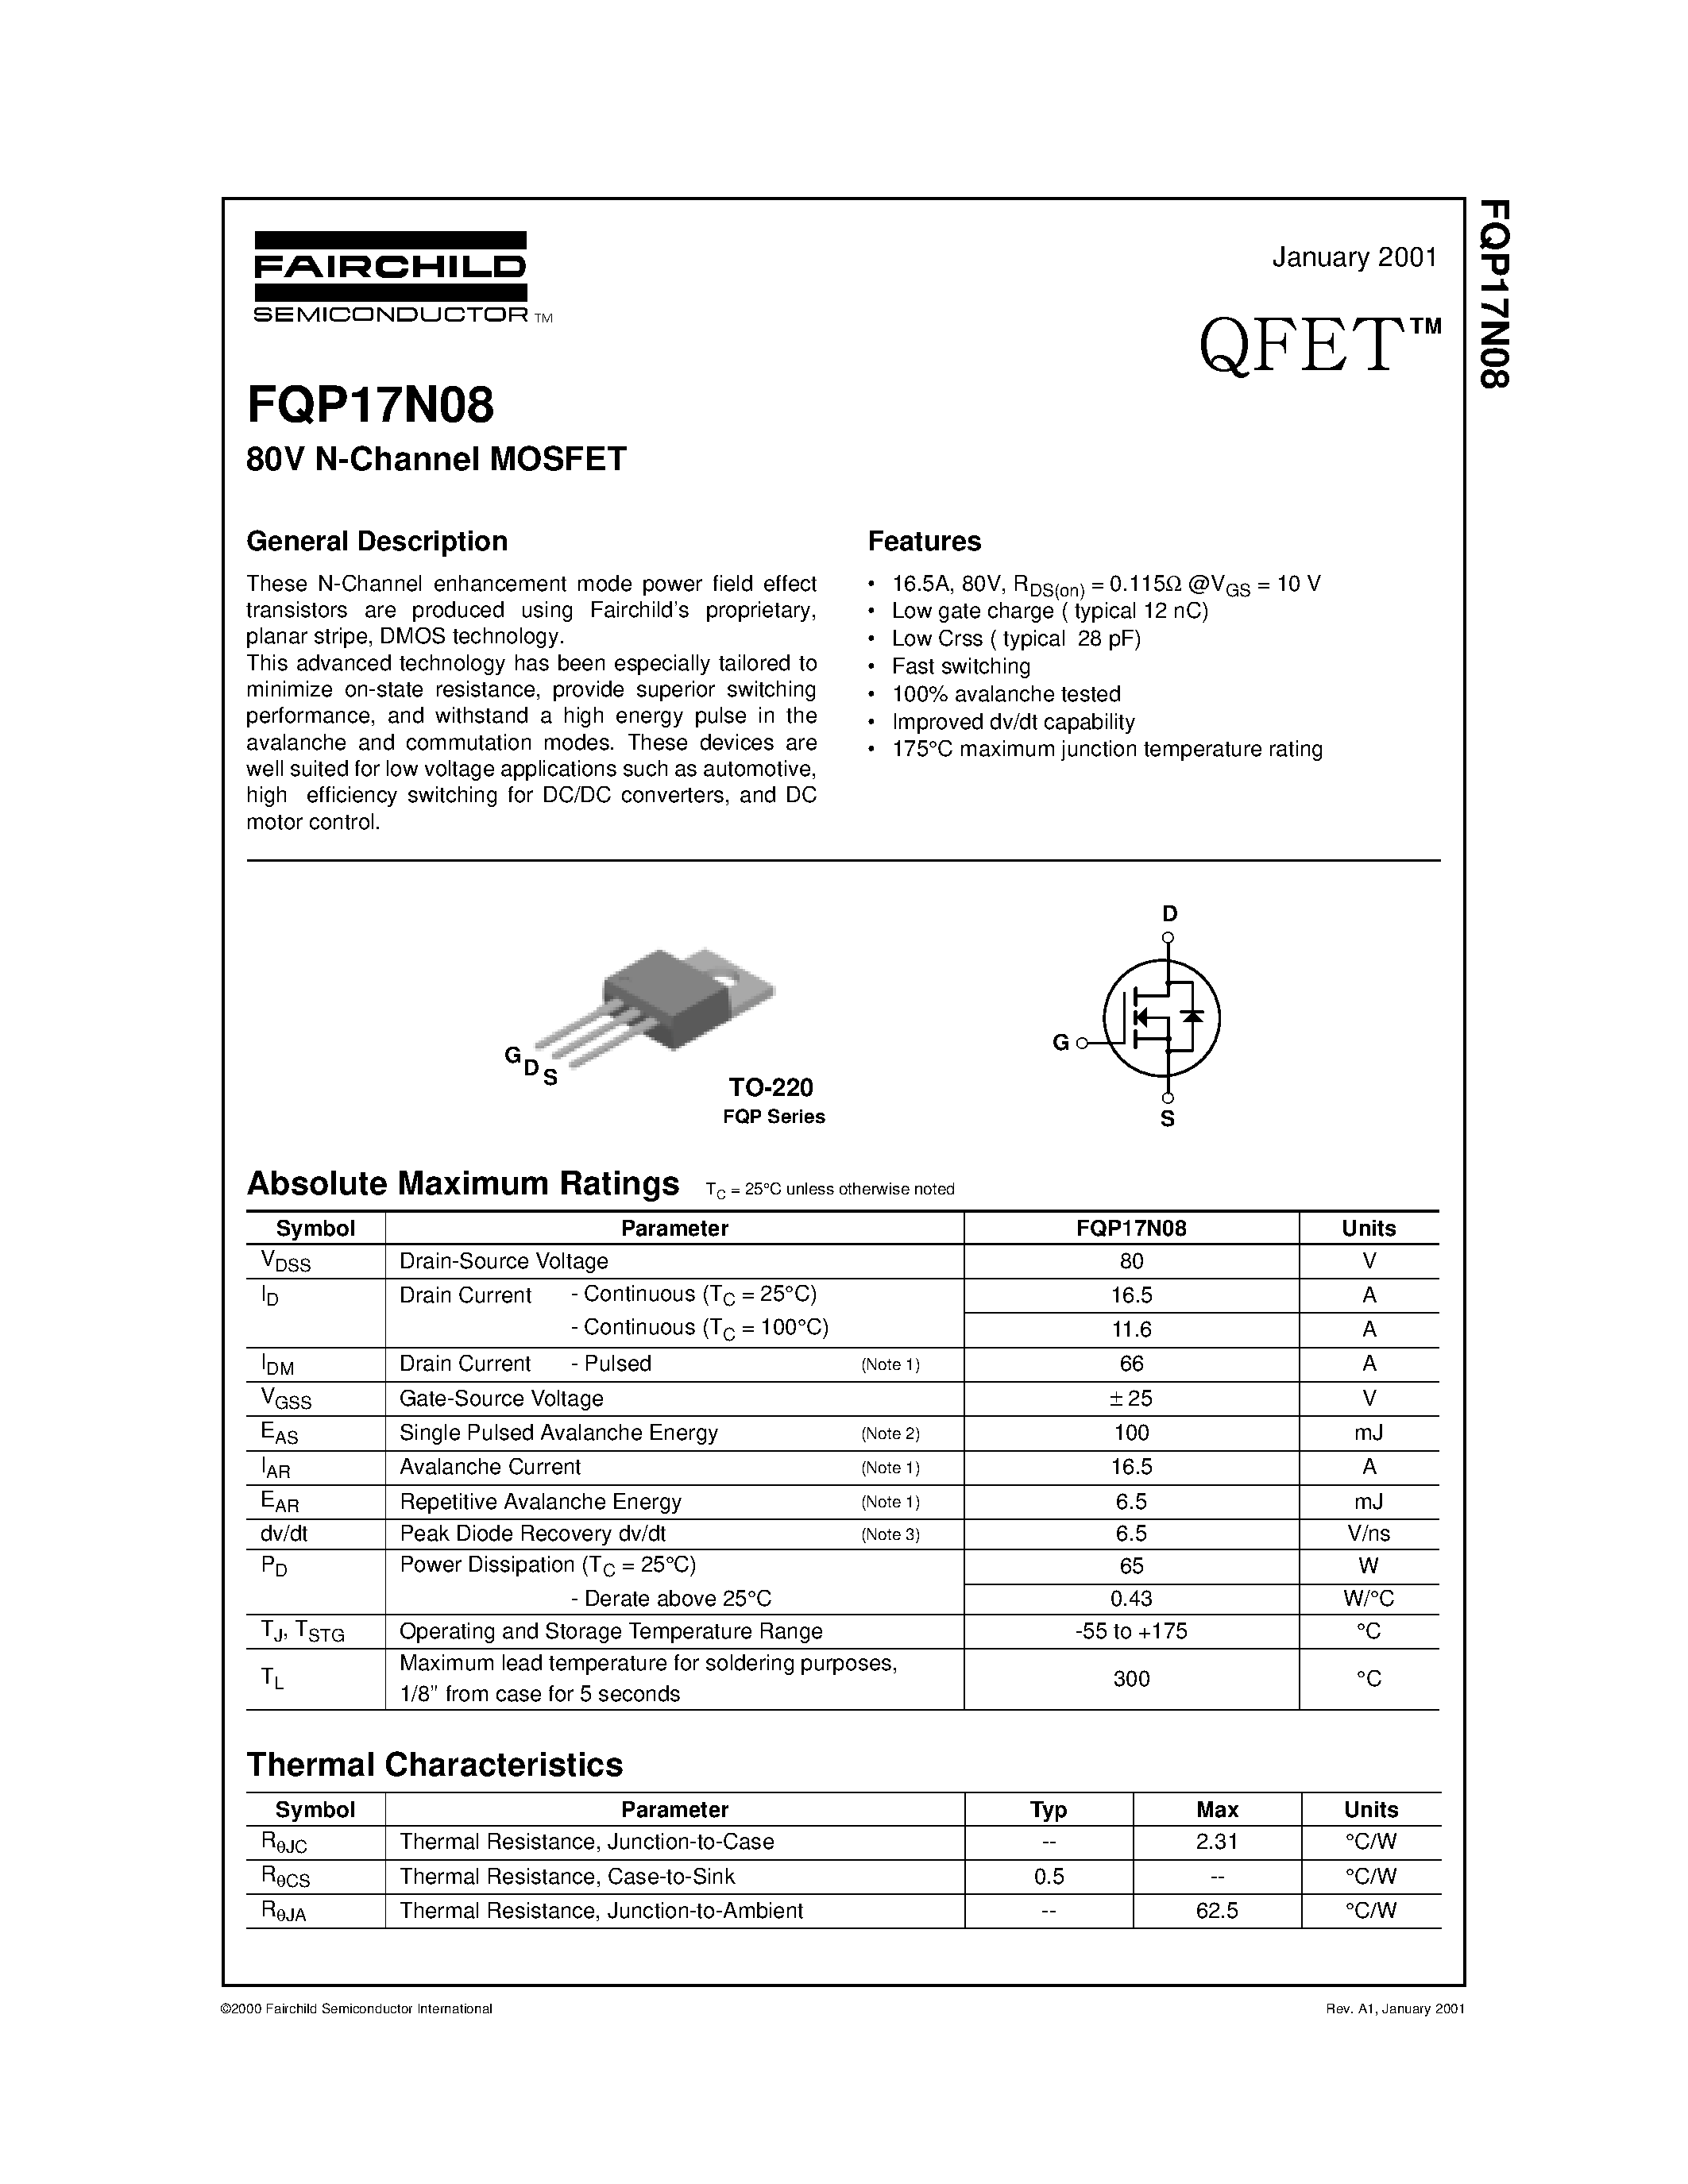 Datasheet FQP17N08 - 80V N-Channel MOSFET page 1